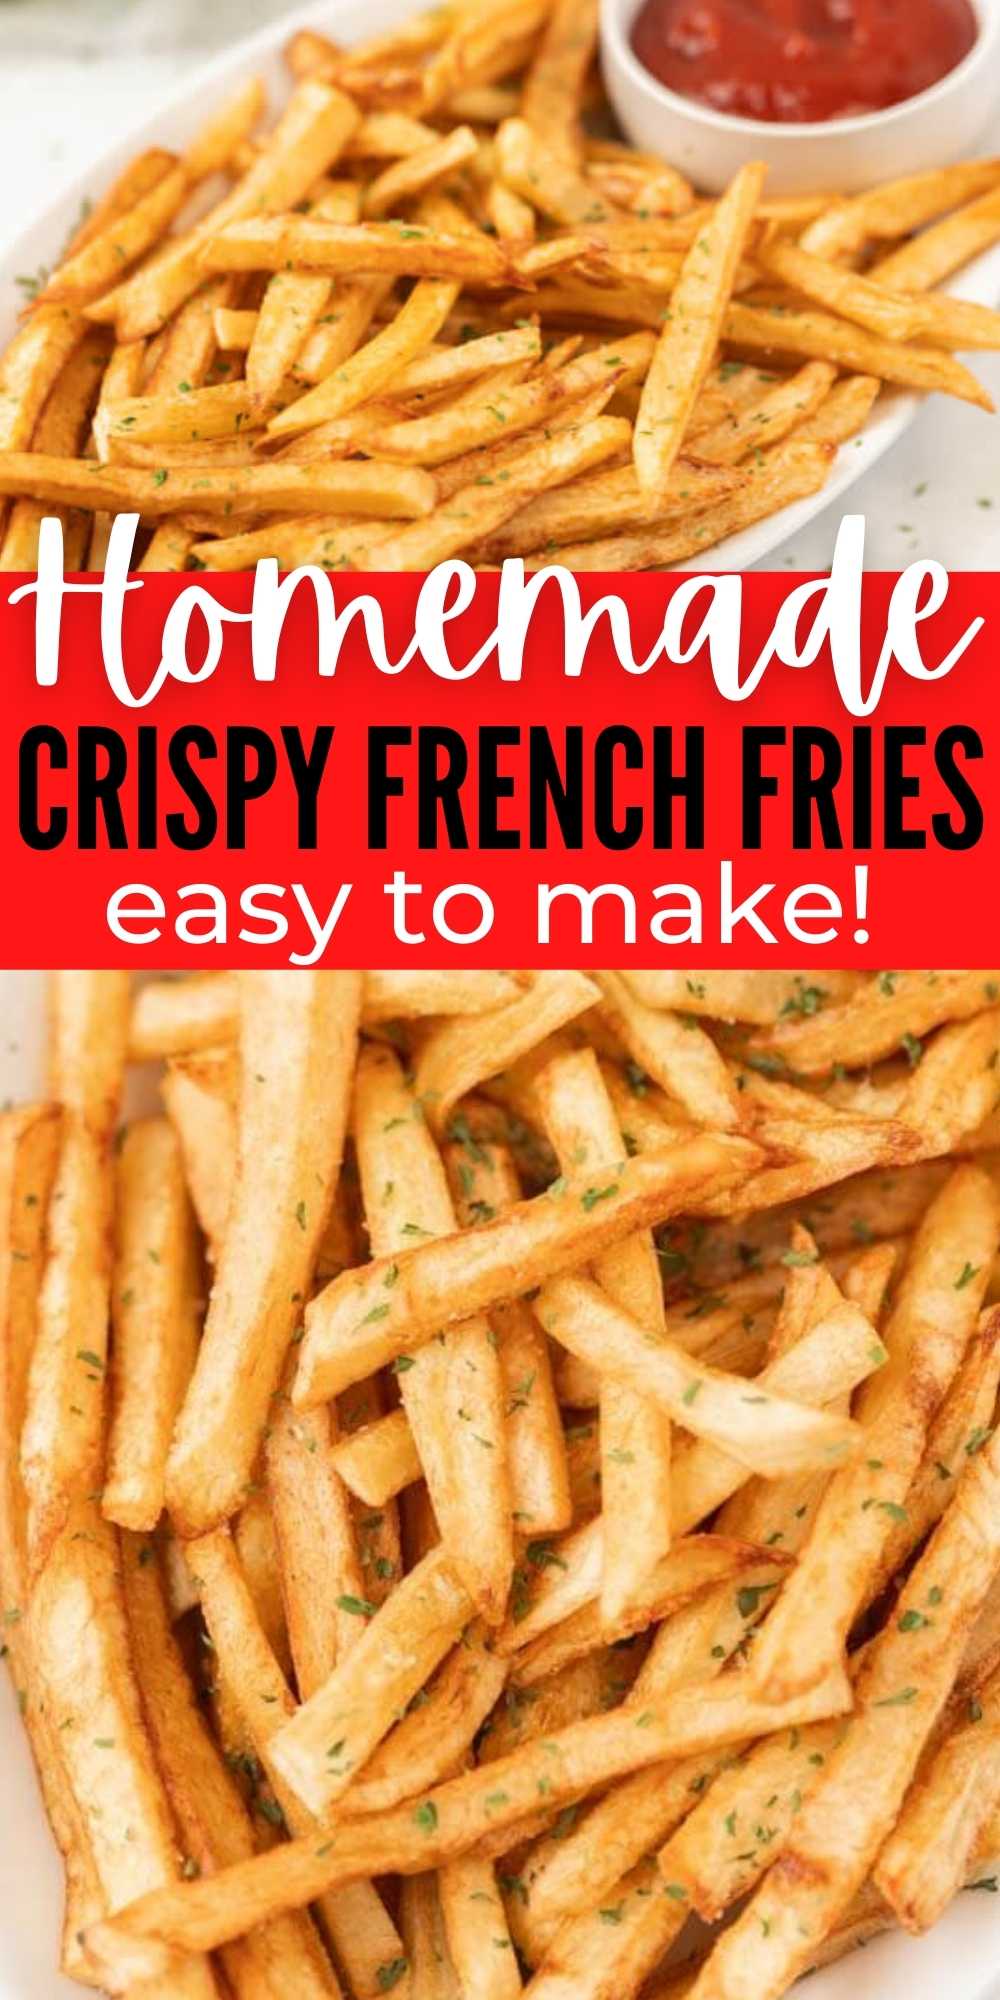 Easy Homemade Crispy French Fries is a quick, fresh recipe that are so easy to make with just a few ingredients. Homemade French fries are delicious and simple to make too!  #eatingonadime #frenchfries #sidedishrecipes #friedrecipes 
